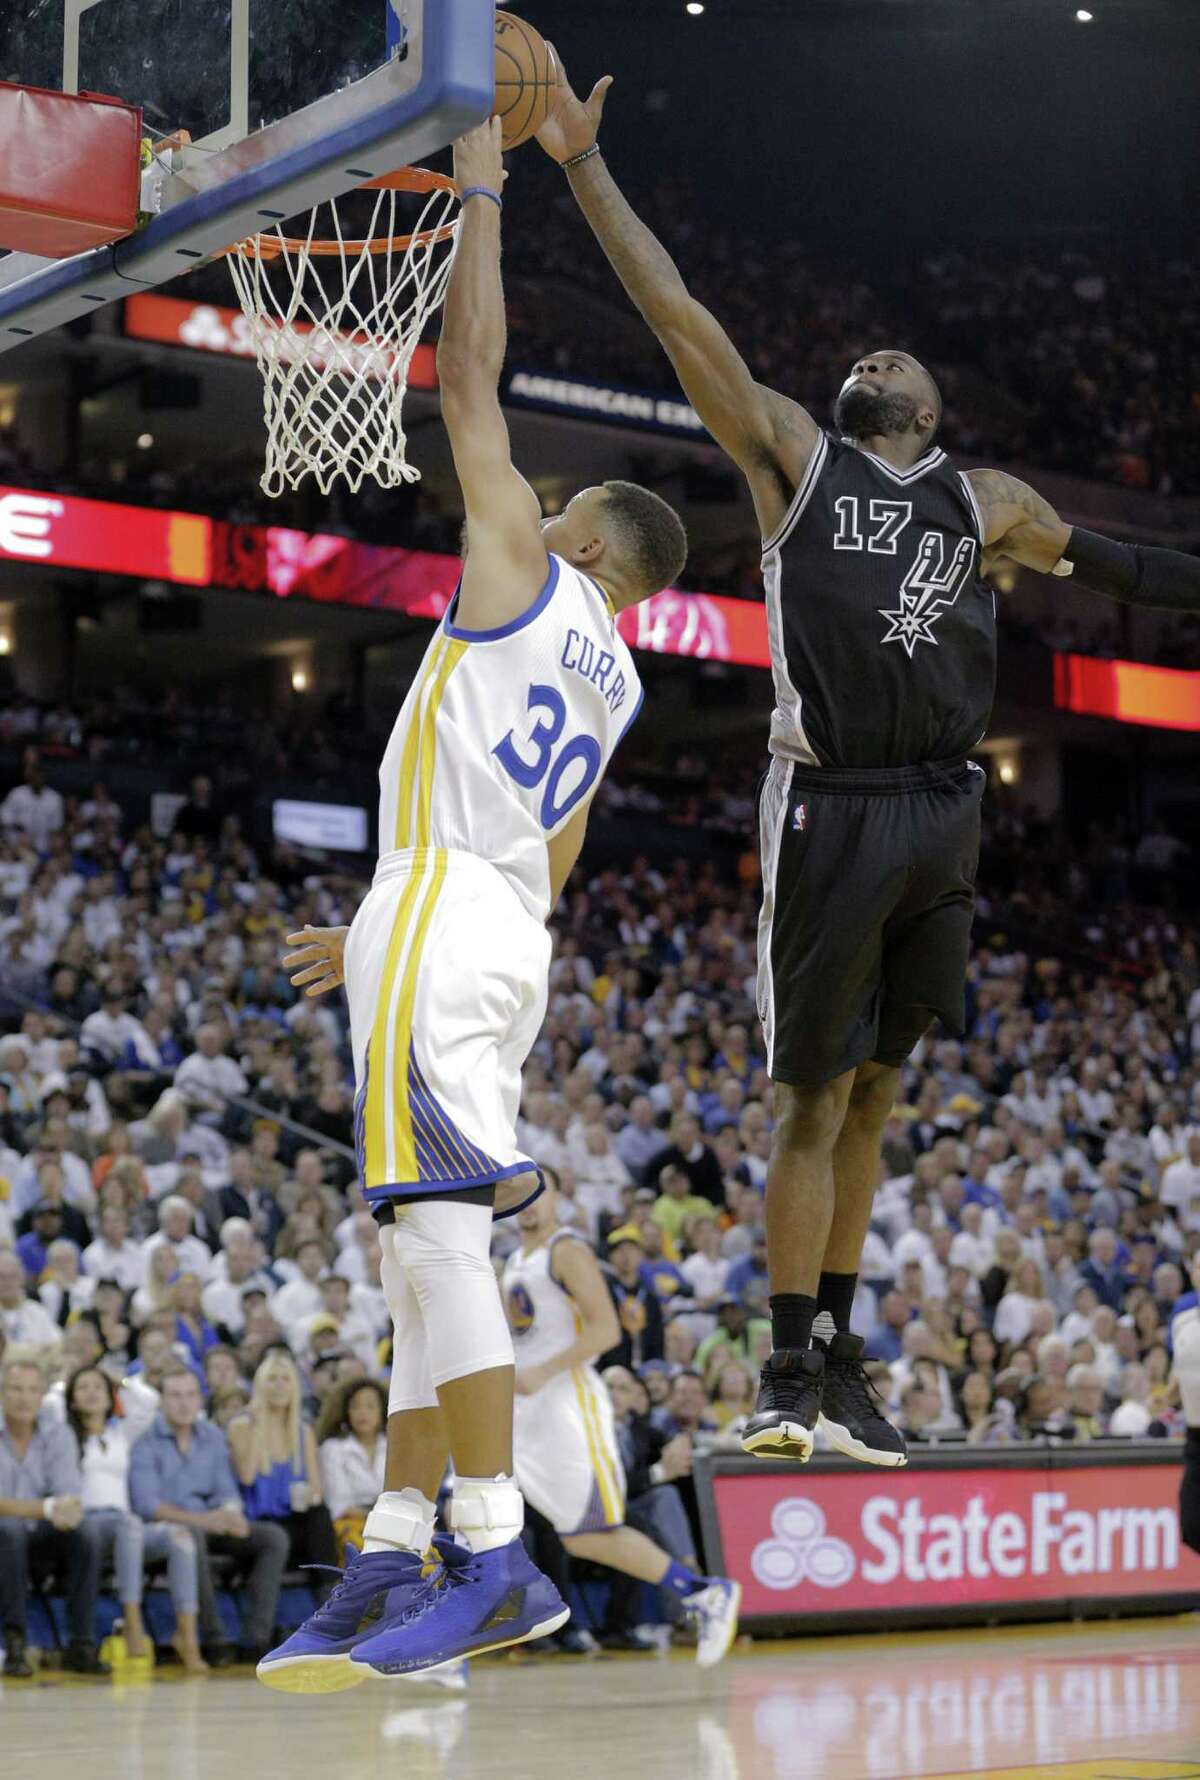 Stephen Curry (30) has his shot blocked by Jonathon Simmons (17) in the second half as the Golden State Warriors played the San Antonio Spurs in their season opener at Oracle Arena in Oakland, Calif., on Tuesday, October 25, 2016.